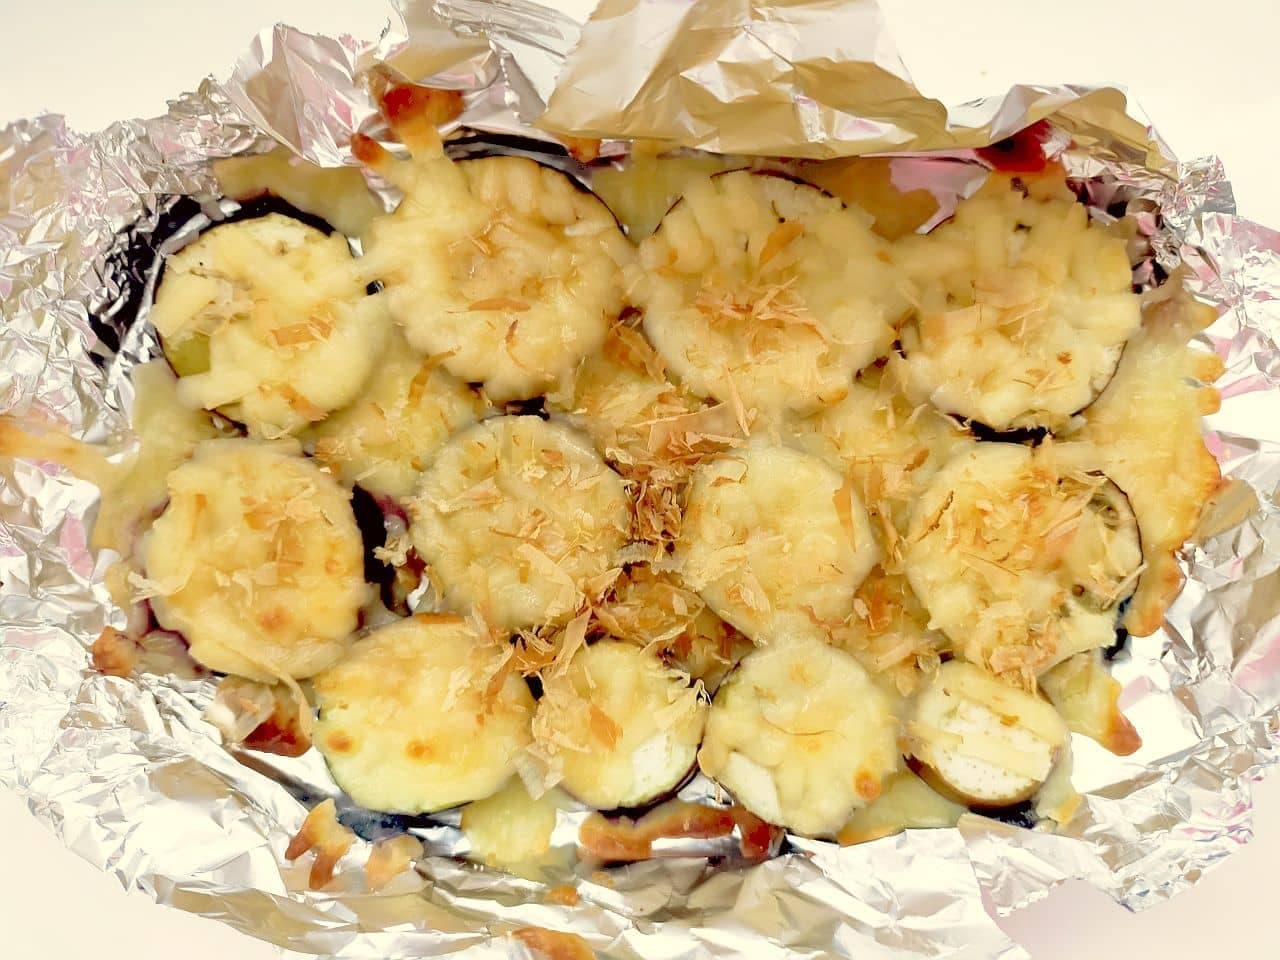 Recipe for grilled eggplant with cheese